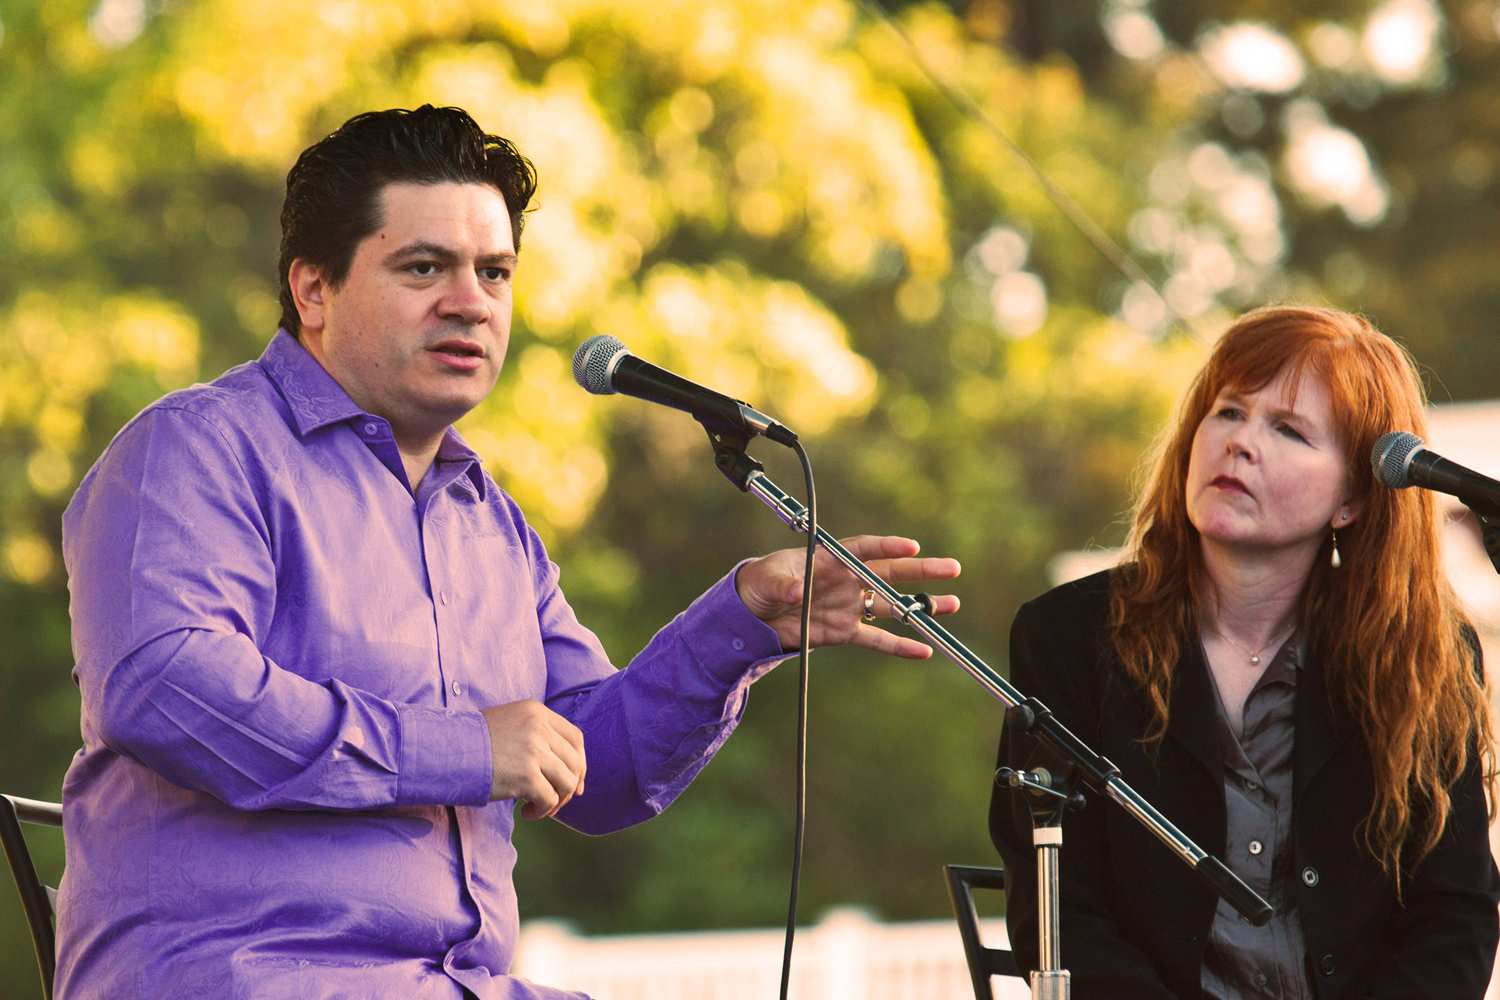 Music Director and Conductor Cristian Macelaru speaks with KALW radio producer, pianist and composer Sarah Cahill.